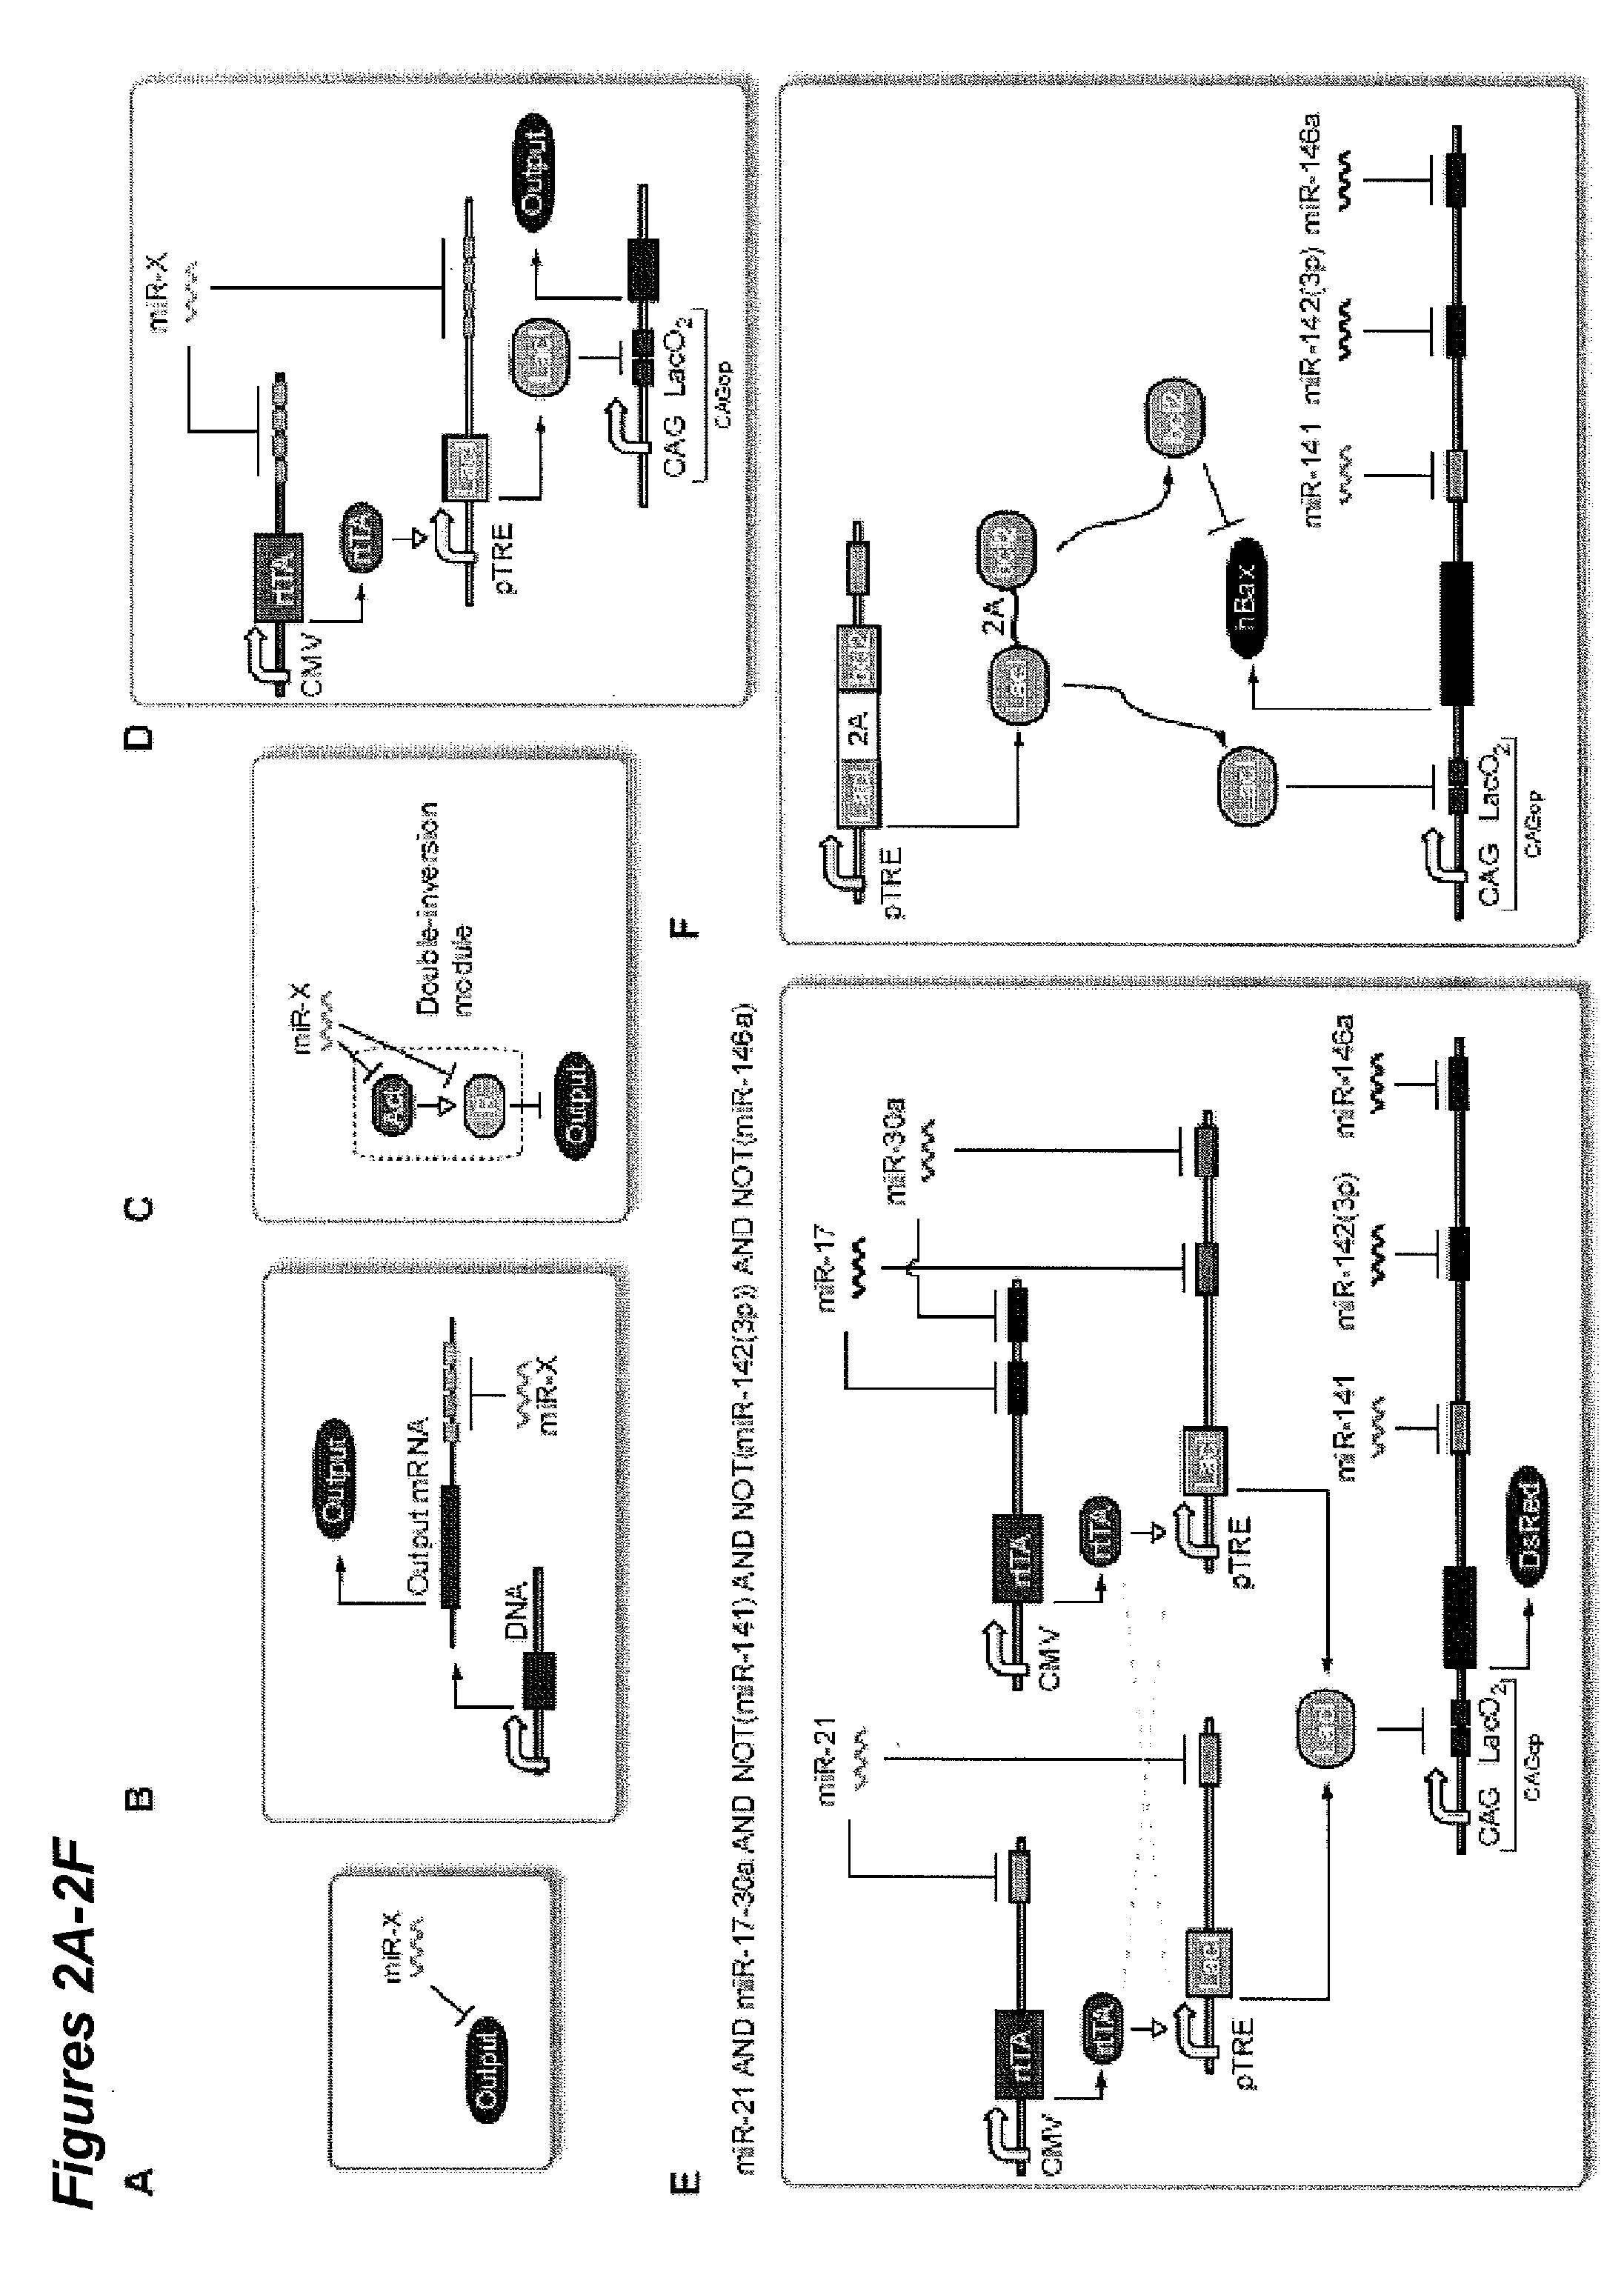 Multiple input biologic classifier circuits for cells